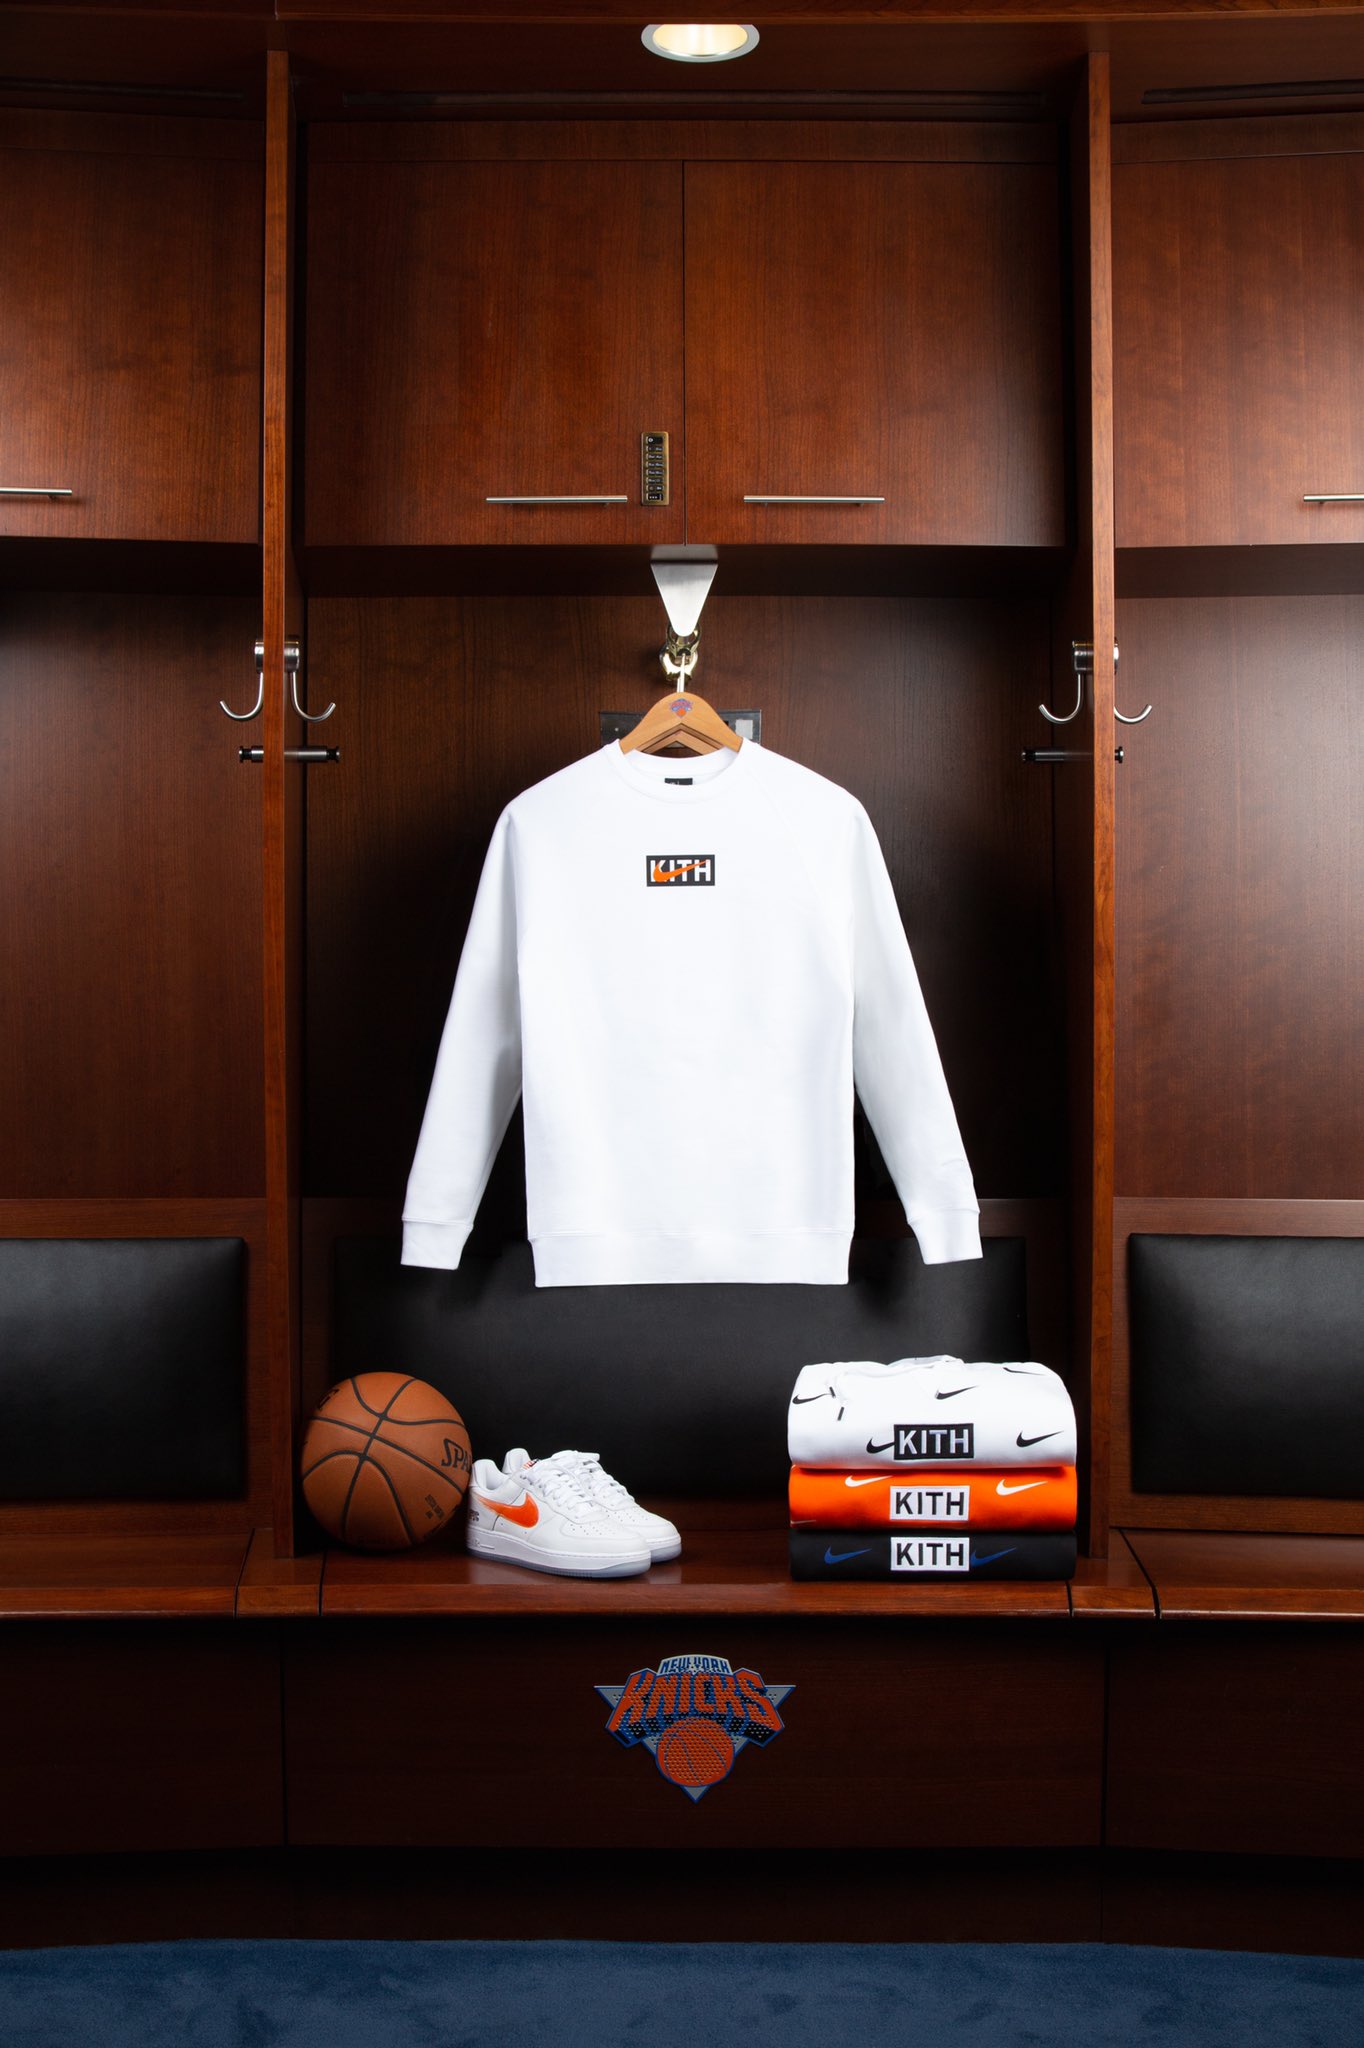 Kith & Nike for New York Knicks. Together we created an off-court